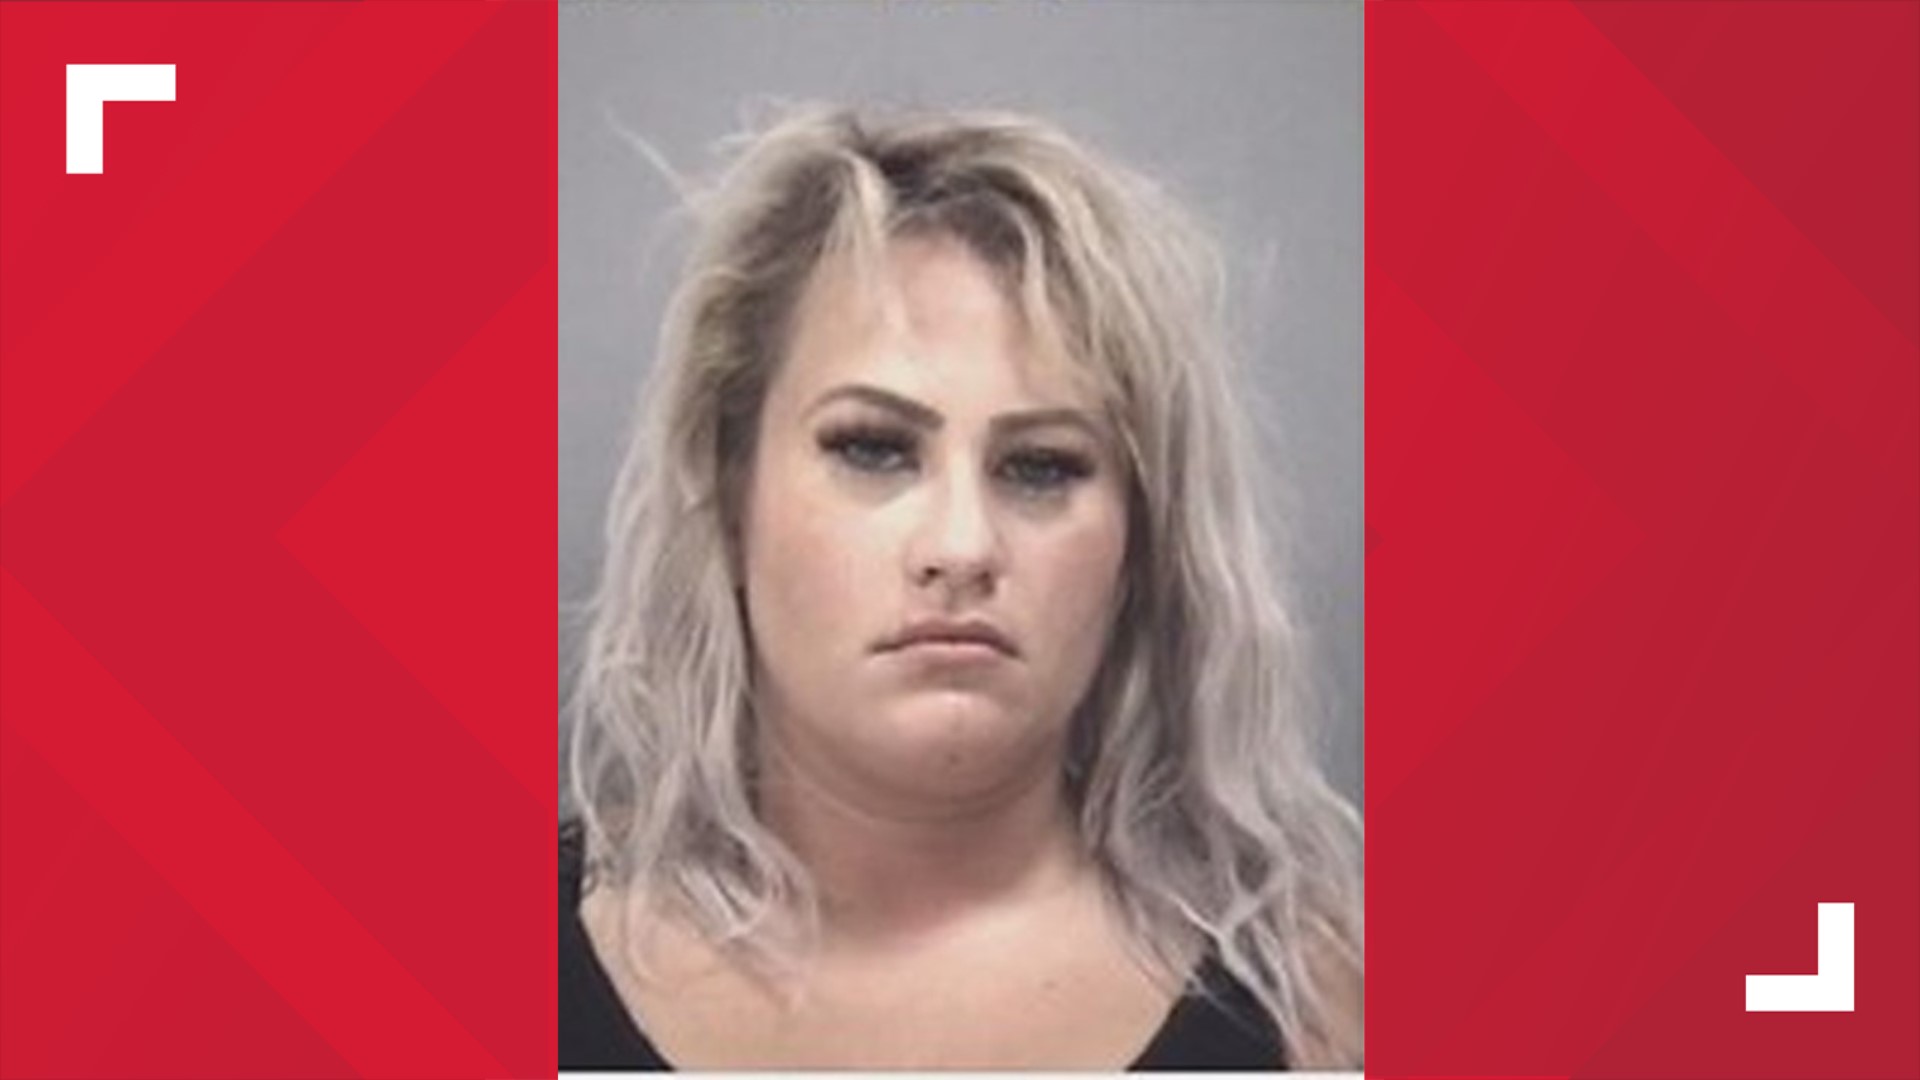 Amber Martens' blood alcohol level was nearly three times the legal limit when she allegedly hit and killed two people, prosecutors say.